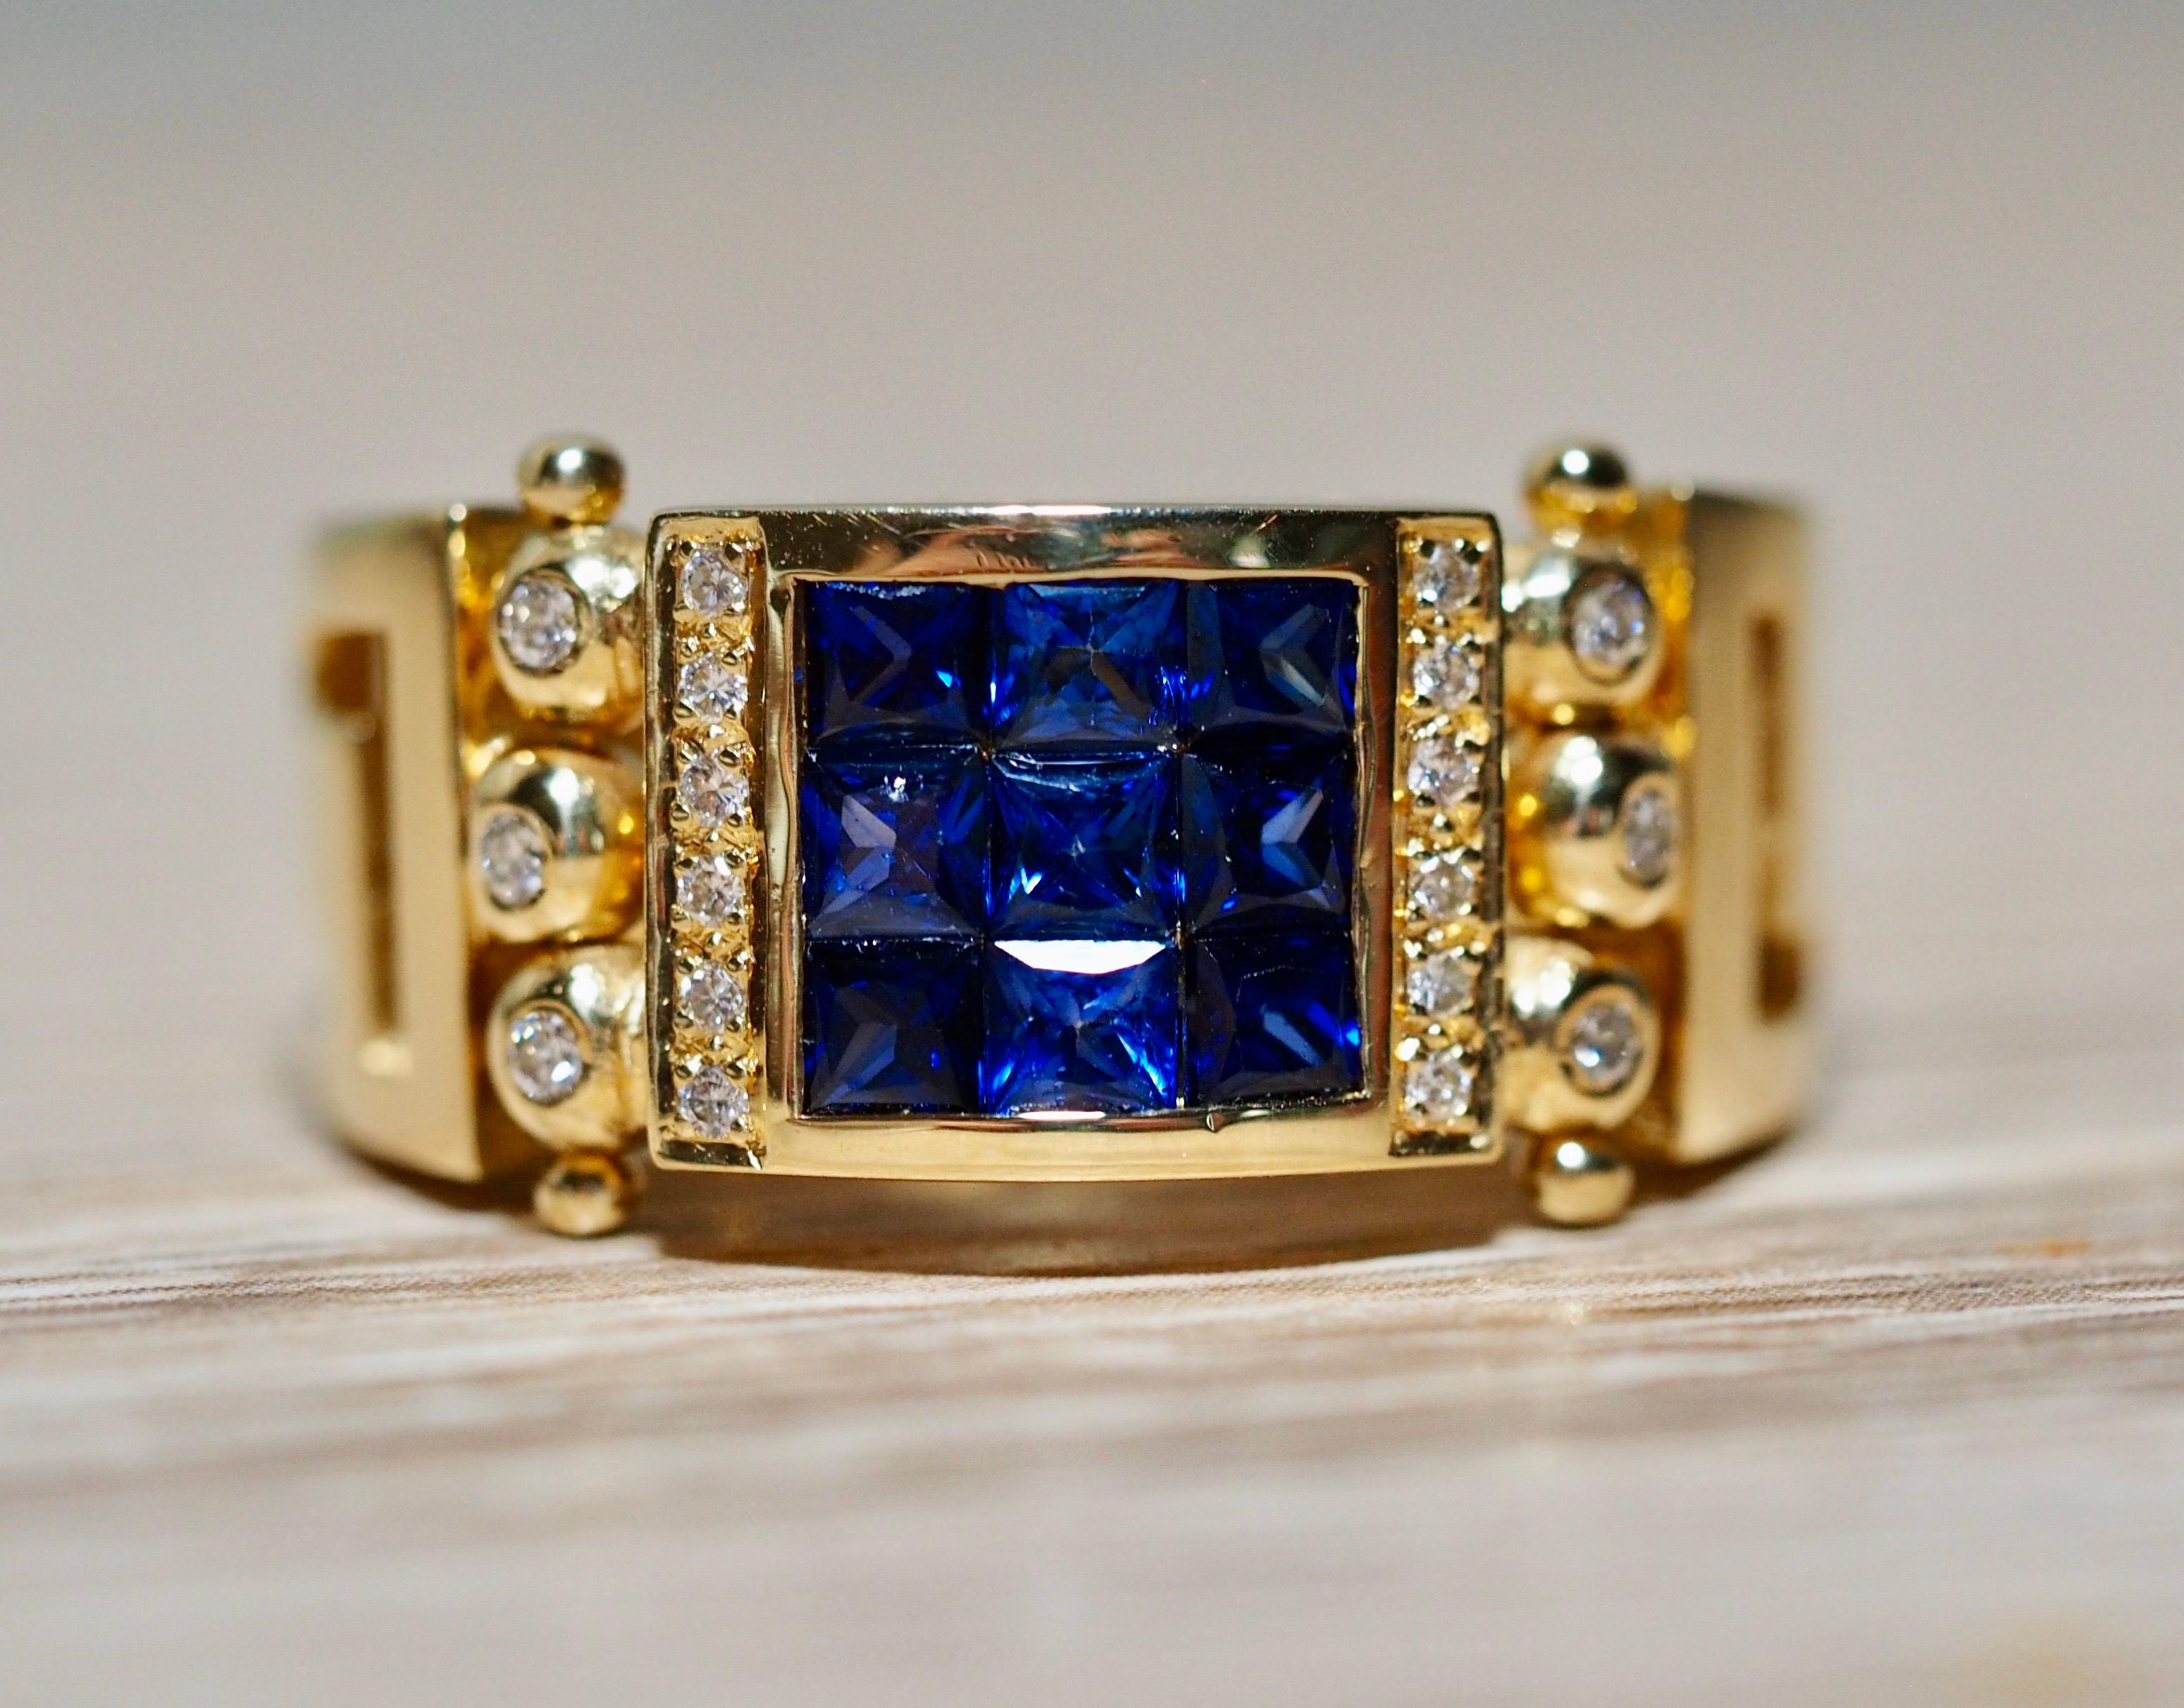 This incredible sapphire ring is detailed at every angle. The square center is made up of nine invisible set squared cut vibrant blue natural sapphires. The sapphires are framed in a yellow gold bezel with a row of diamonds on each side. Next to the